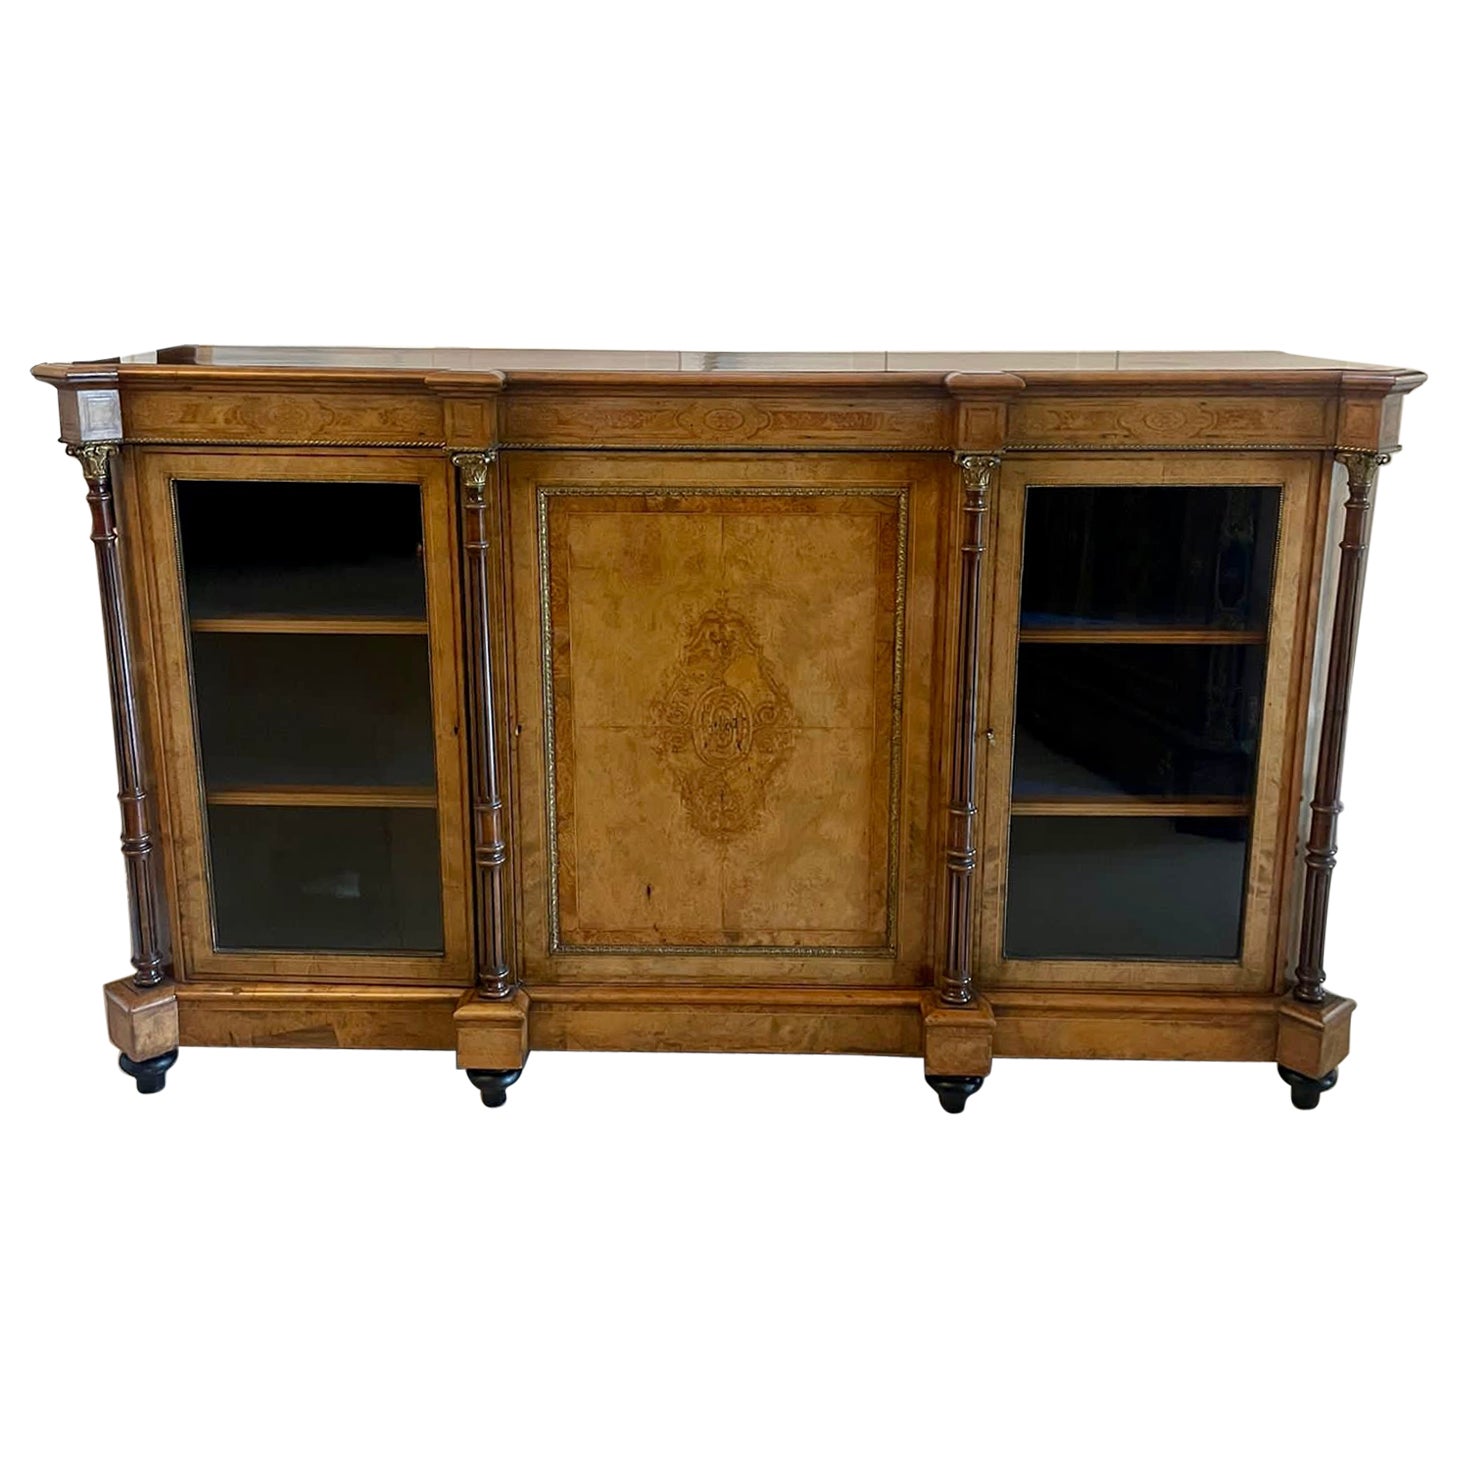 Outstanding Quality Antique Victorian Burr Walnut Inlaid Credenza/Sideboard For Sale